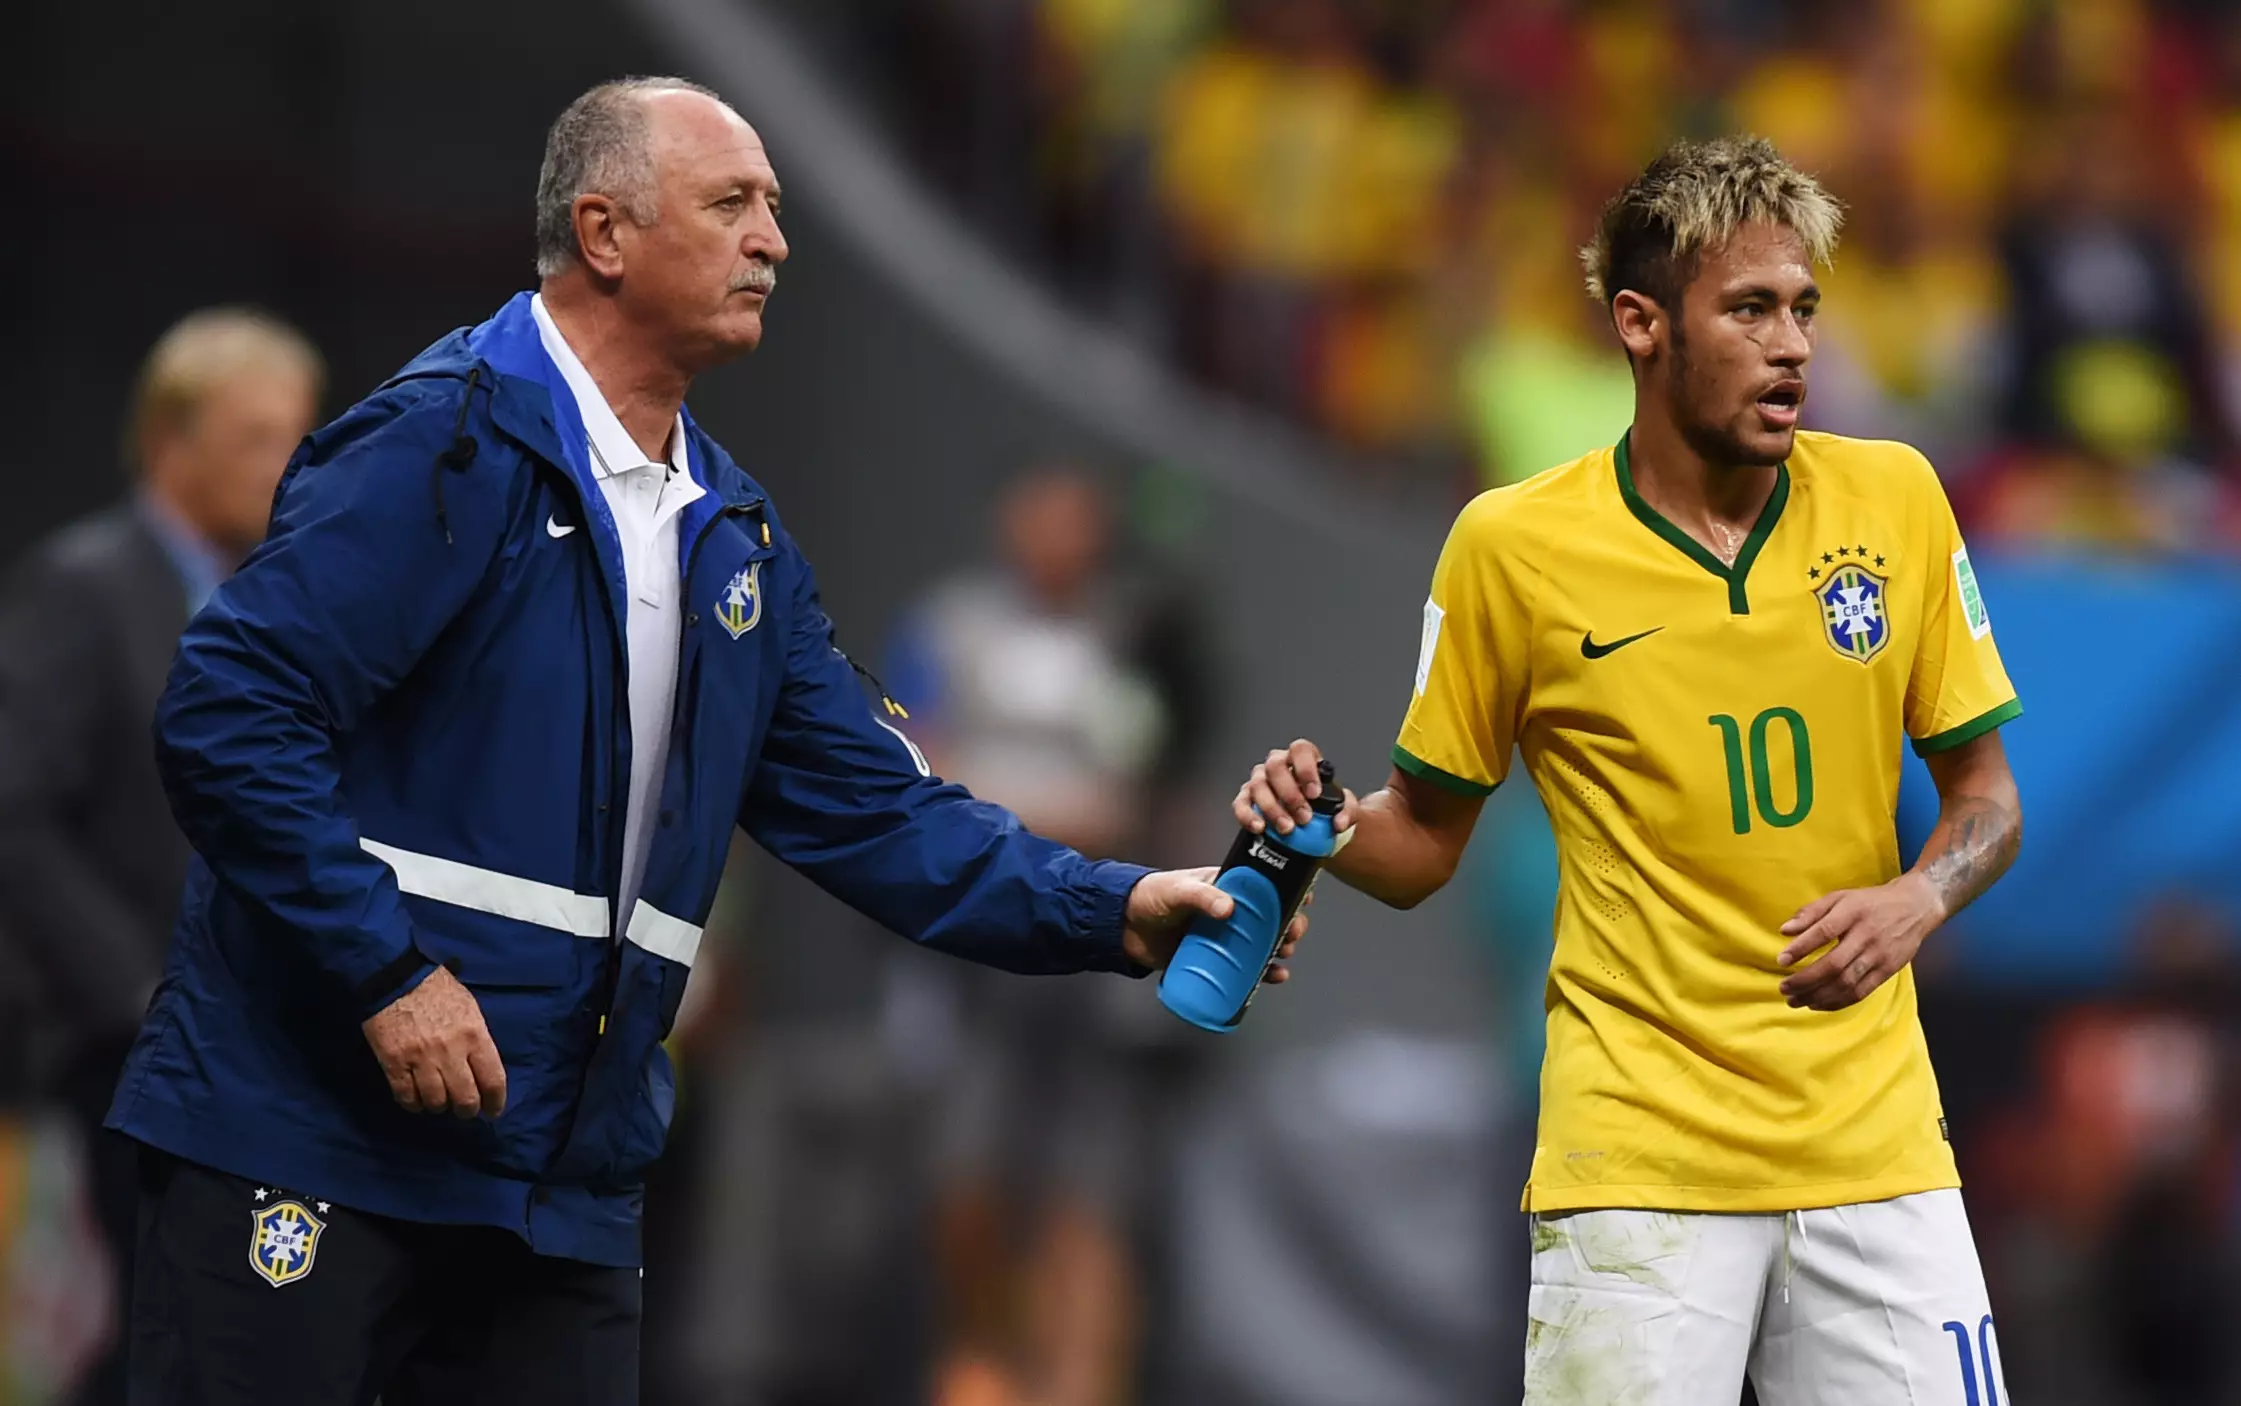 Scolari coached Neymar for Brazil but wants to coach Messi too. Image: PA Images